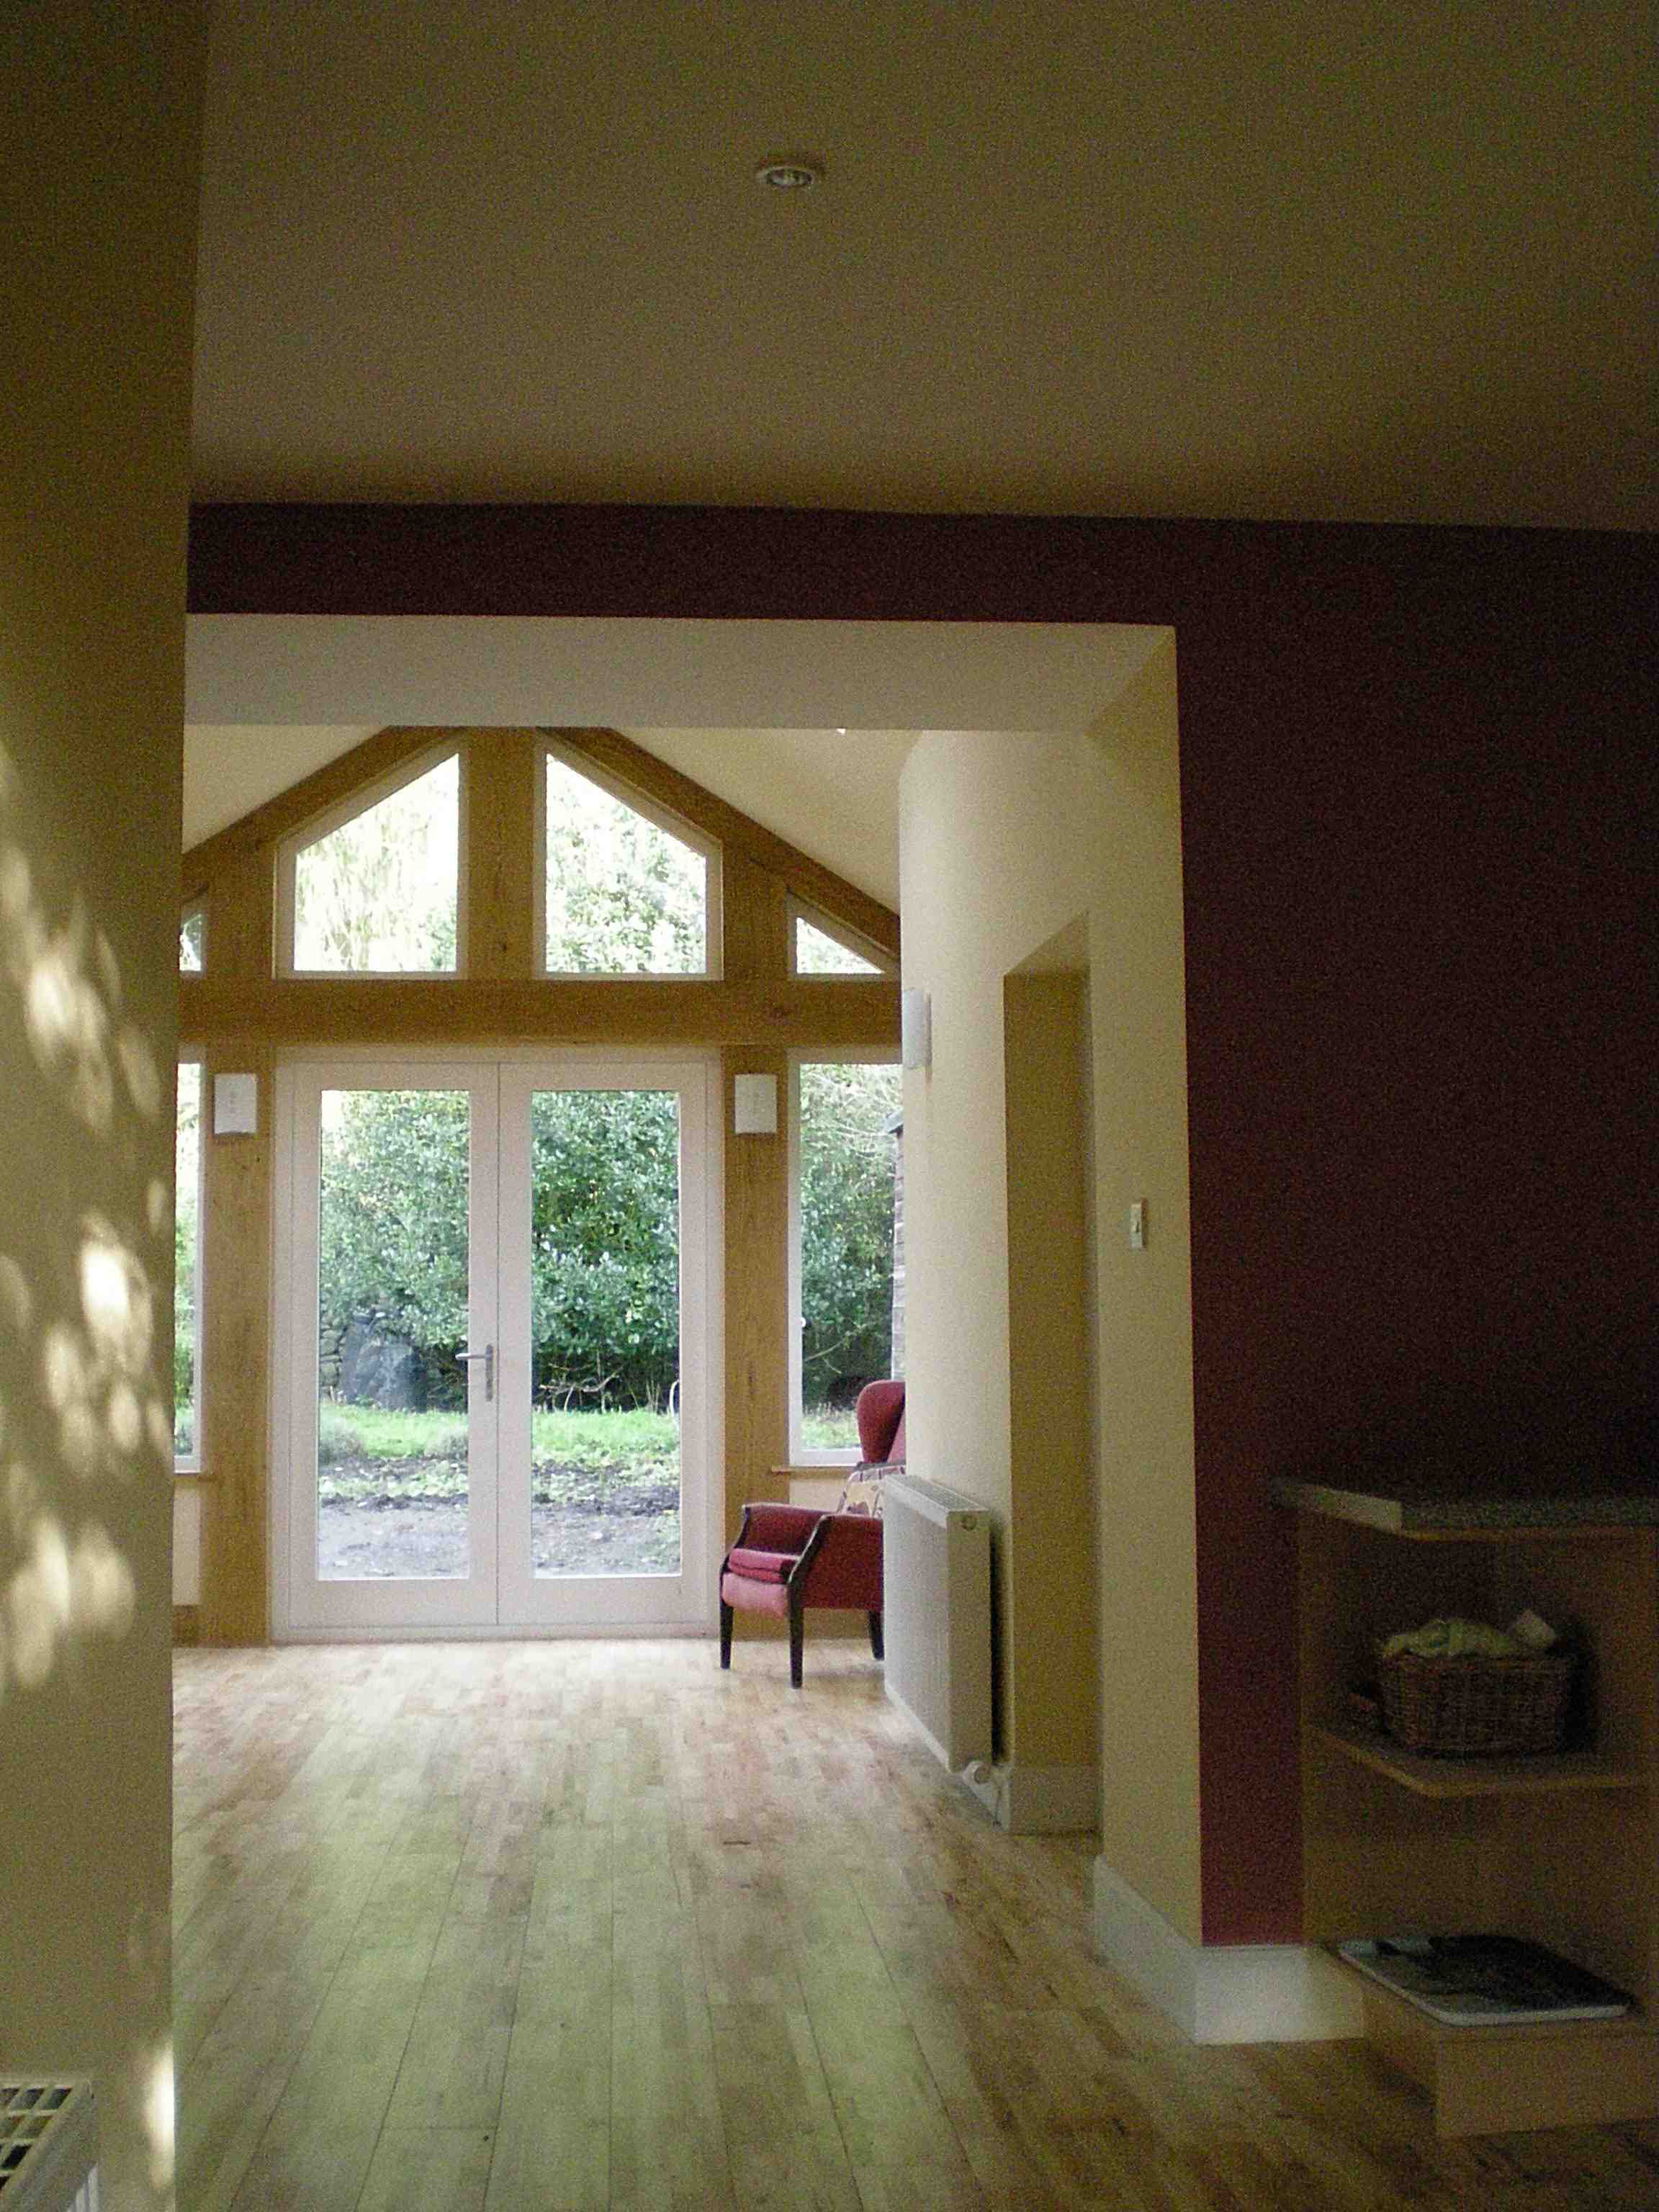 WWY interior view